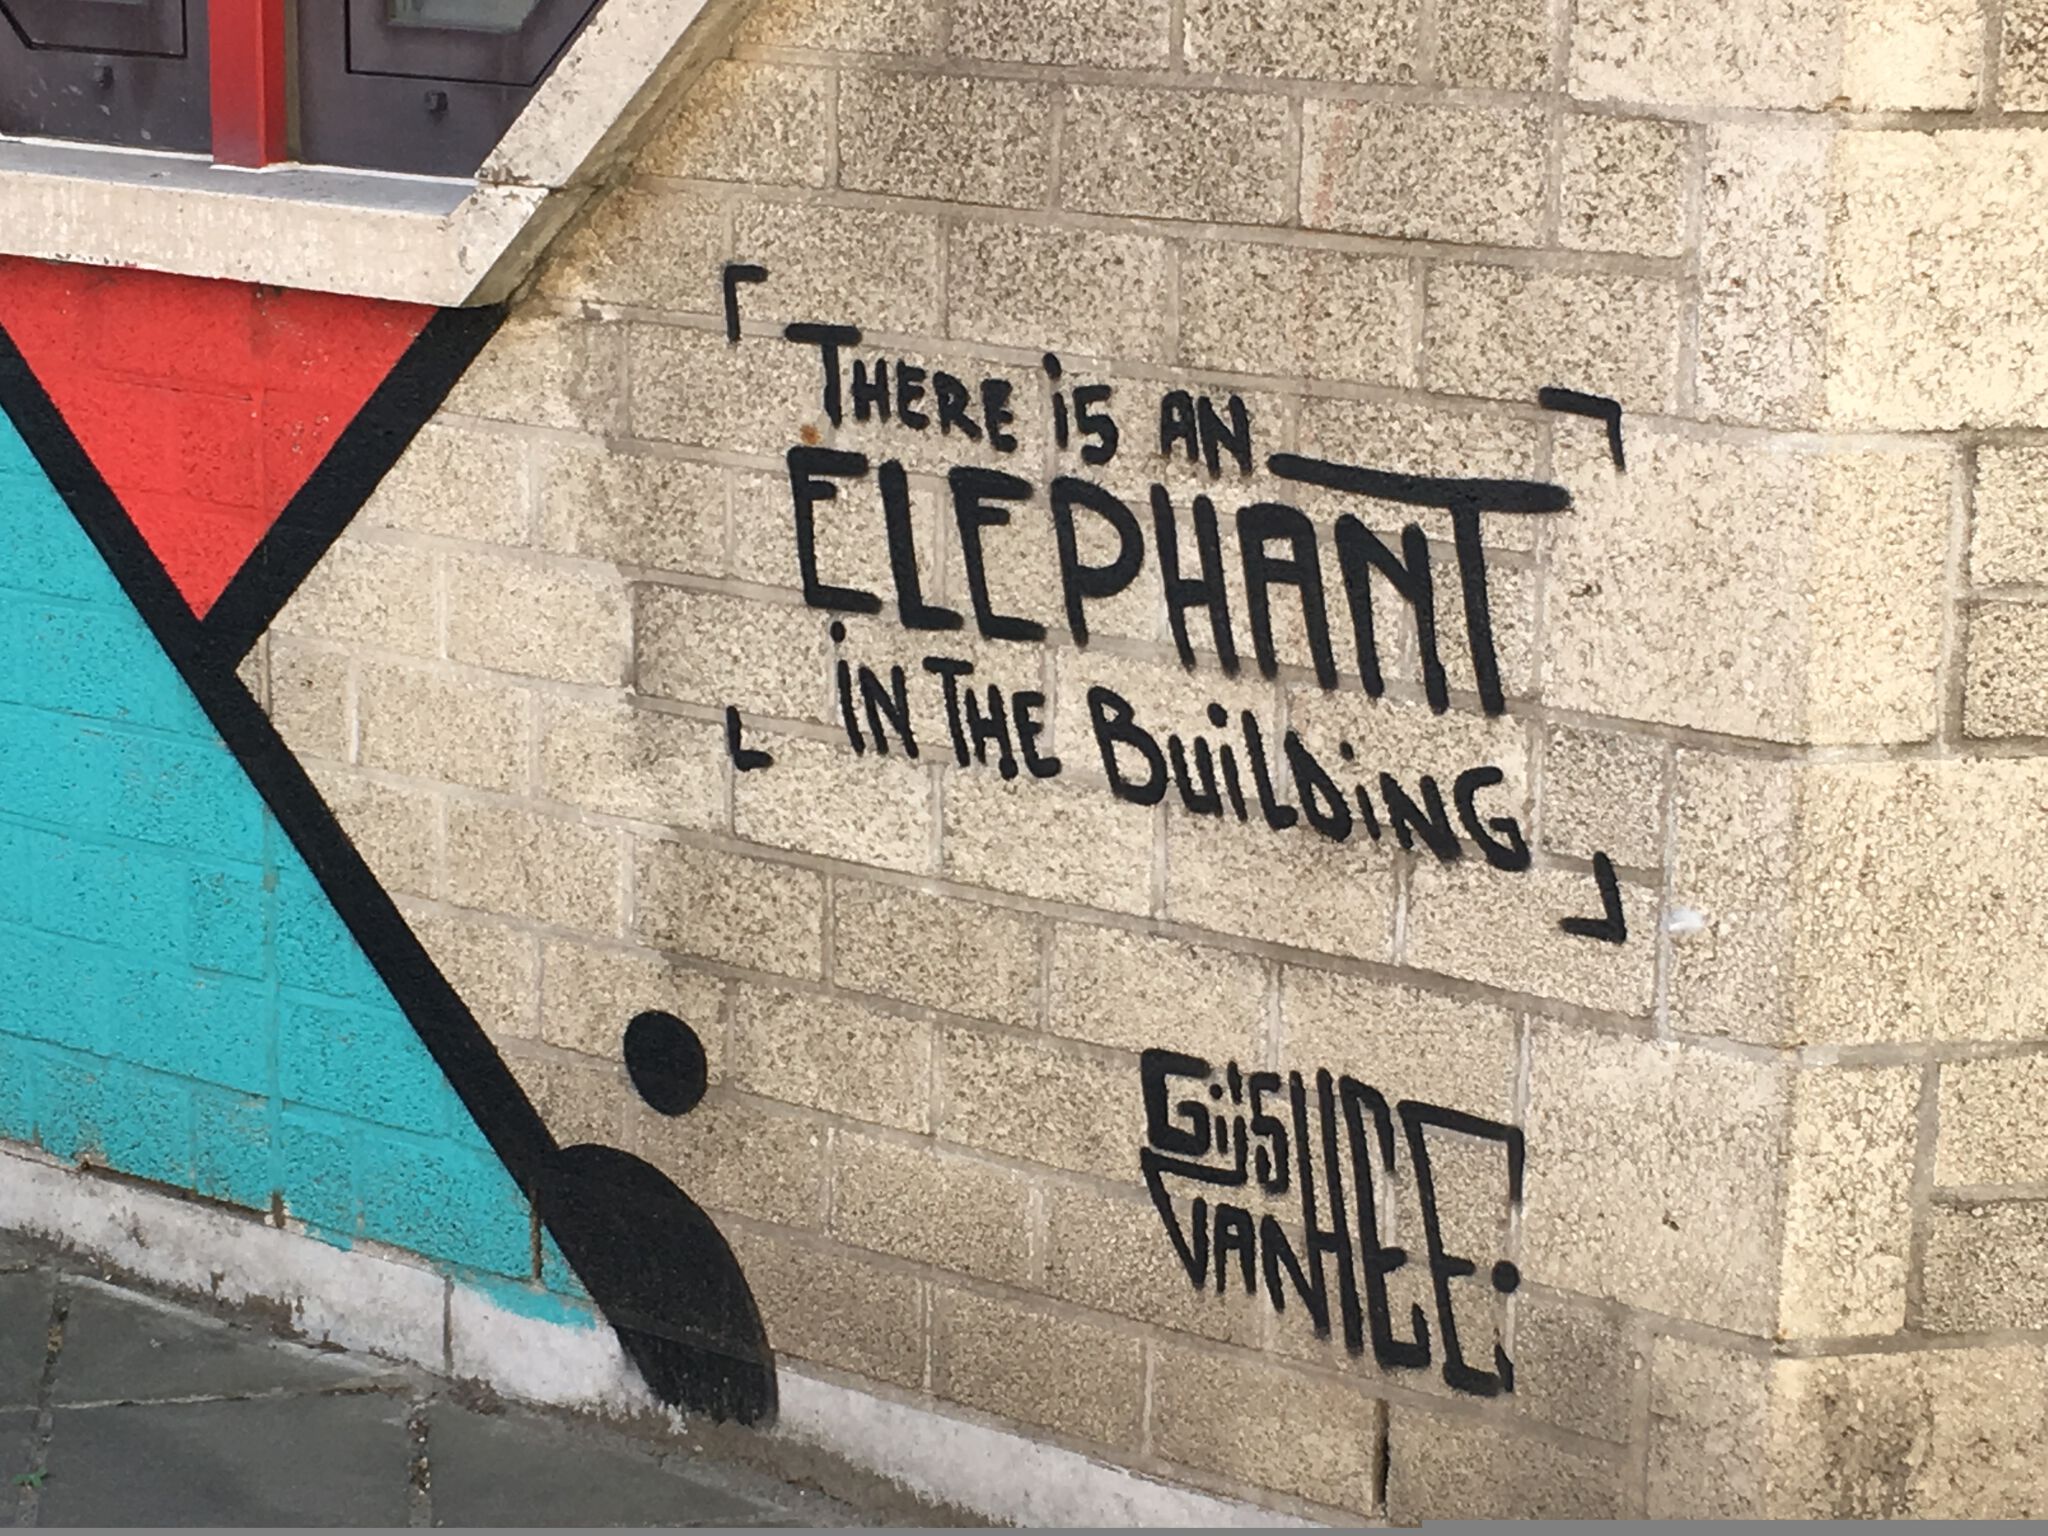 Gijs Vanhee&mdash;There is an elephant in the building